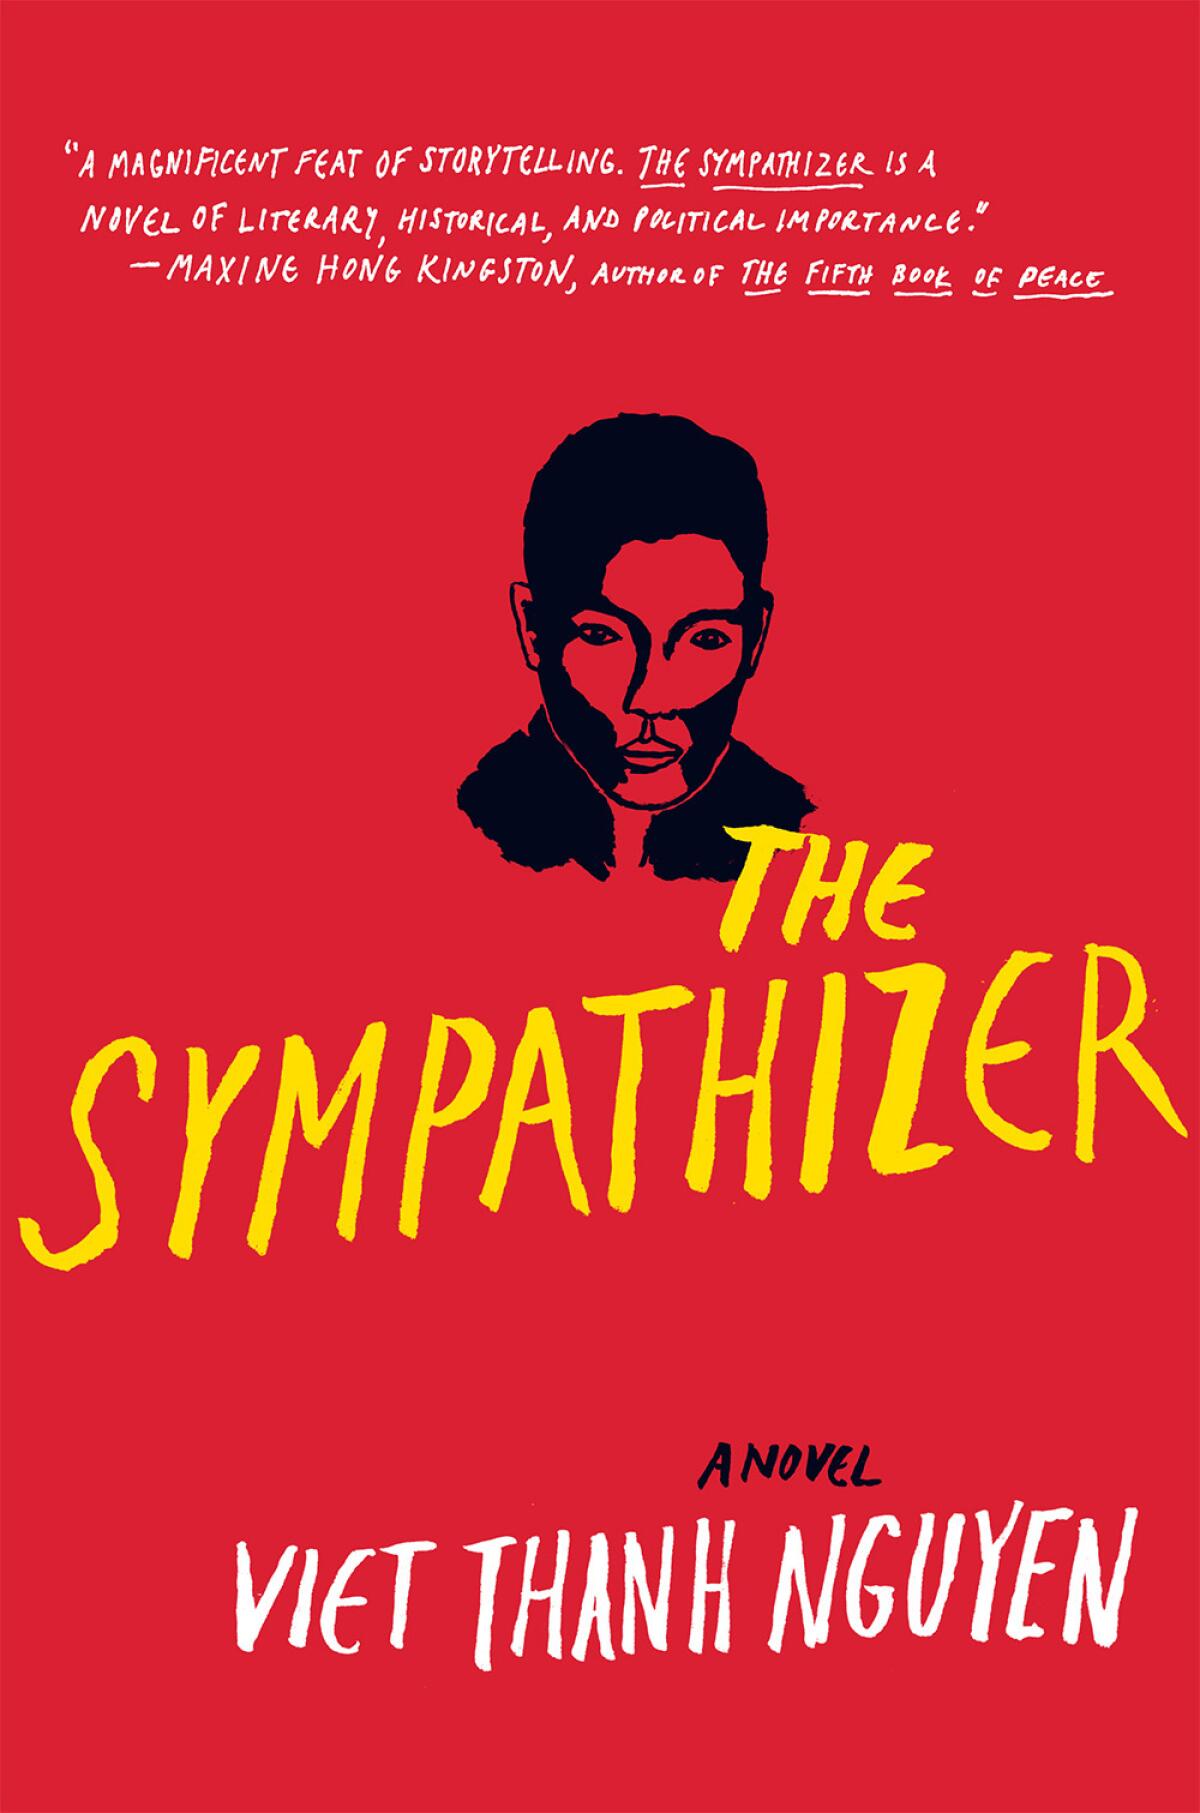 Cover of the book "The Sympathizer" by Viet Thanh Nguyen.